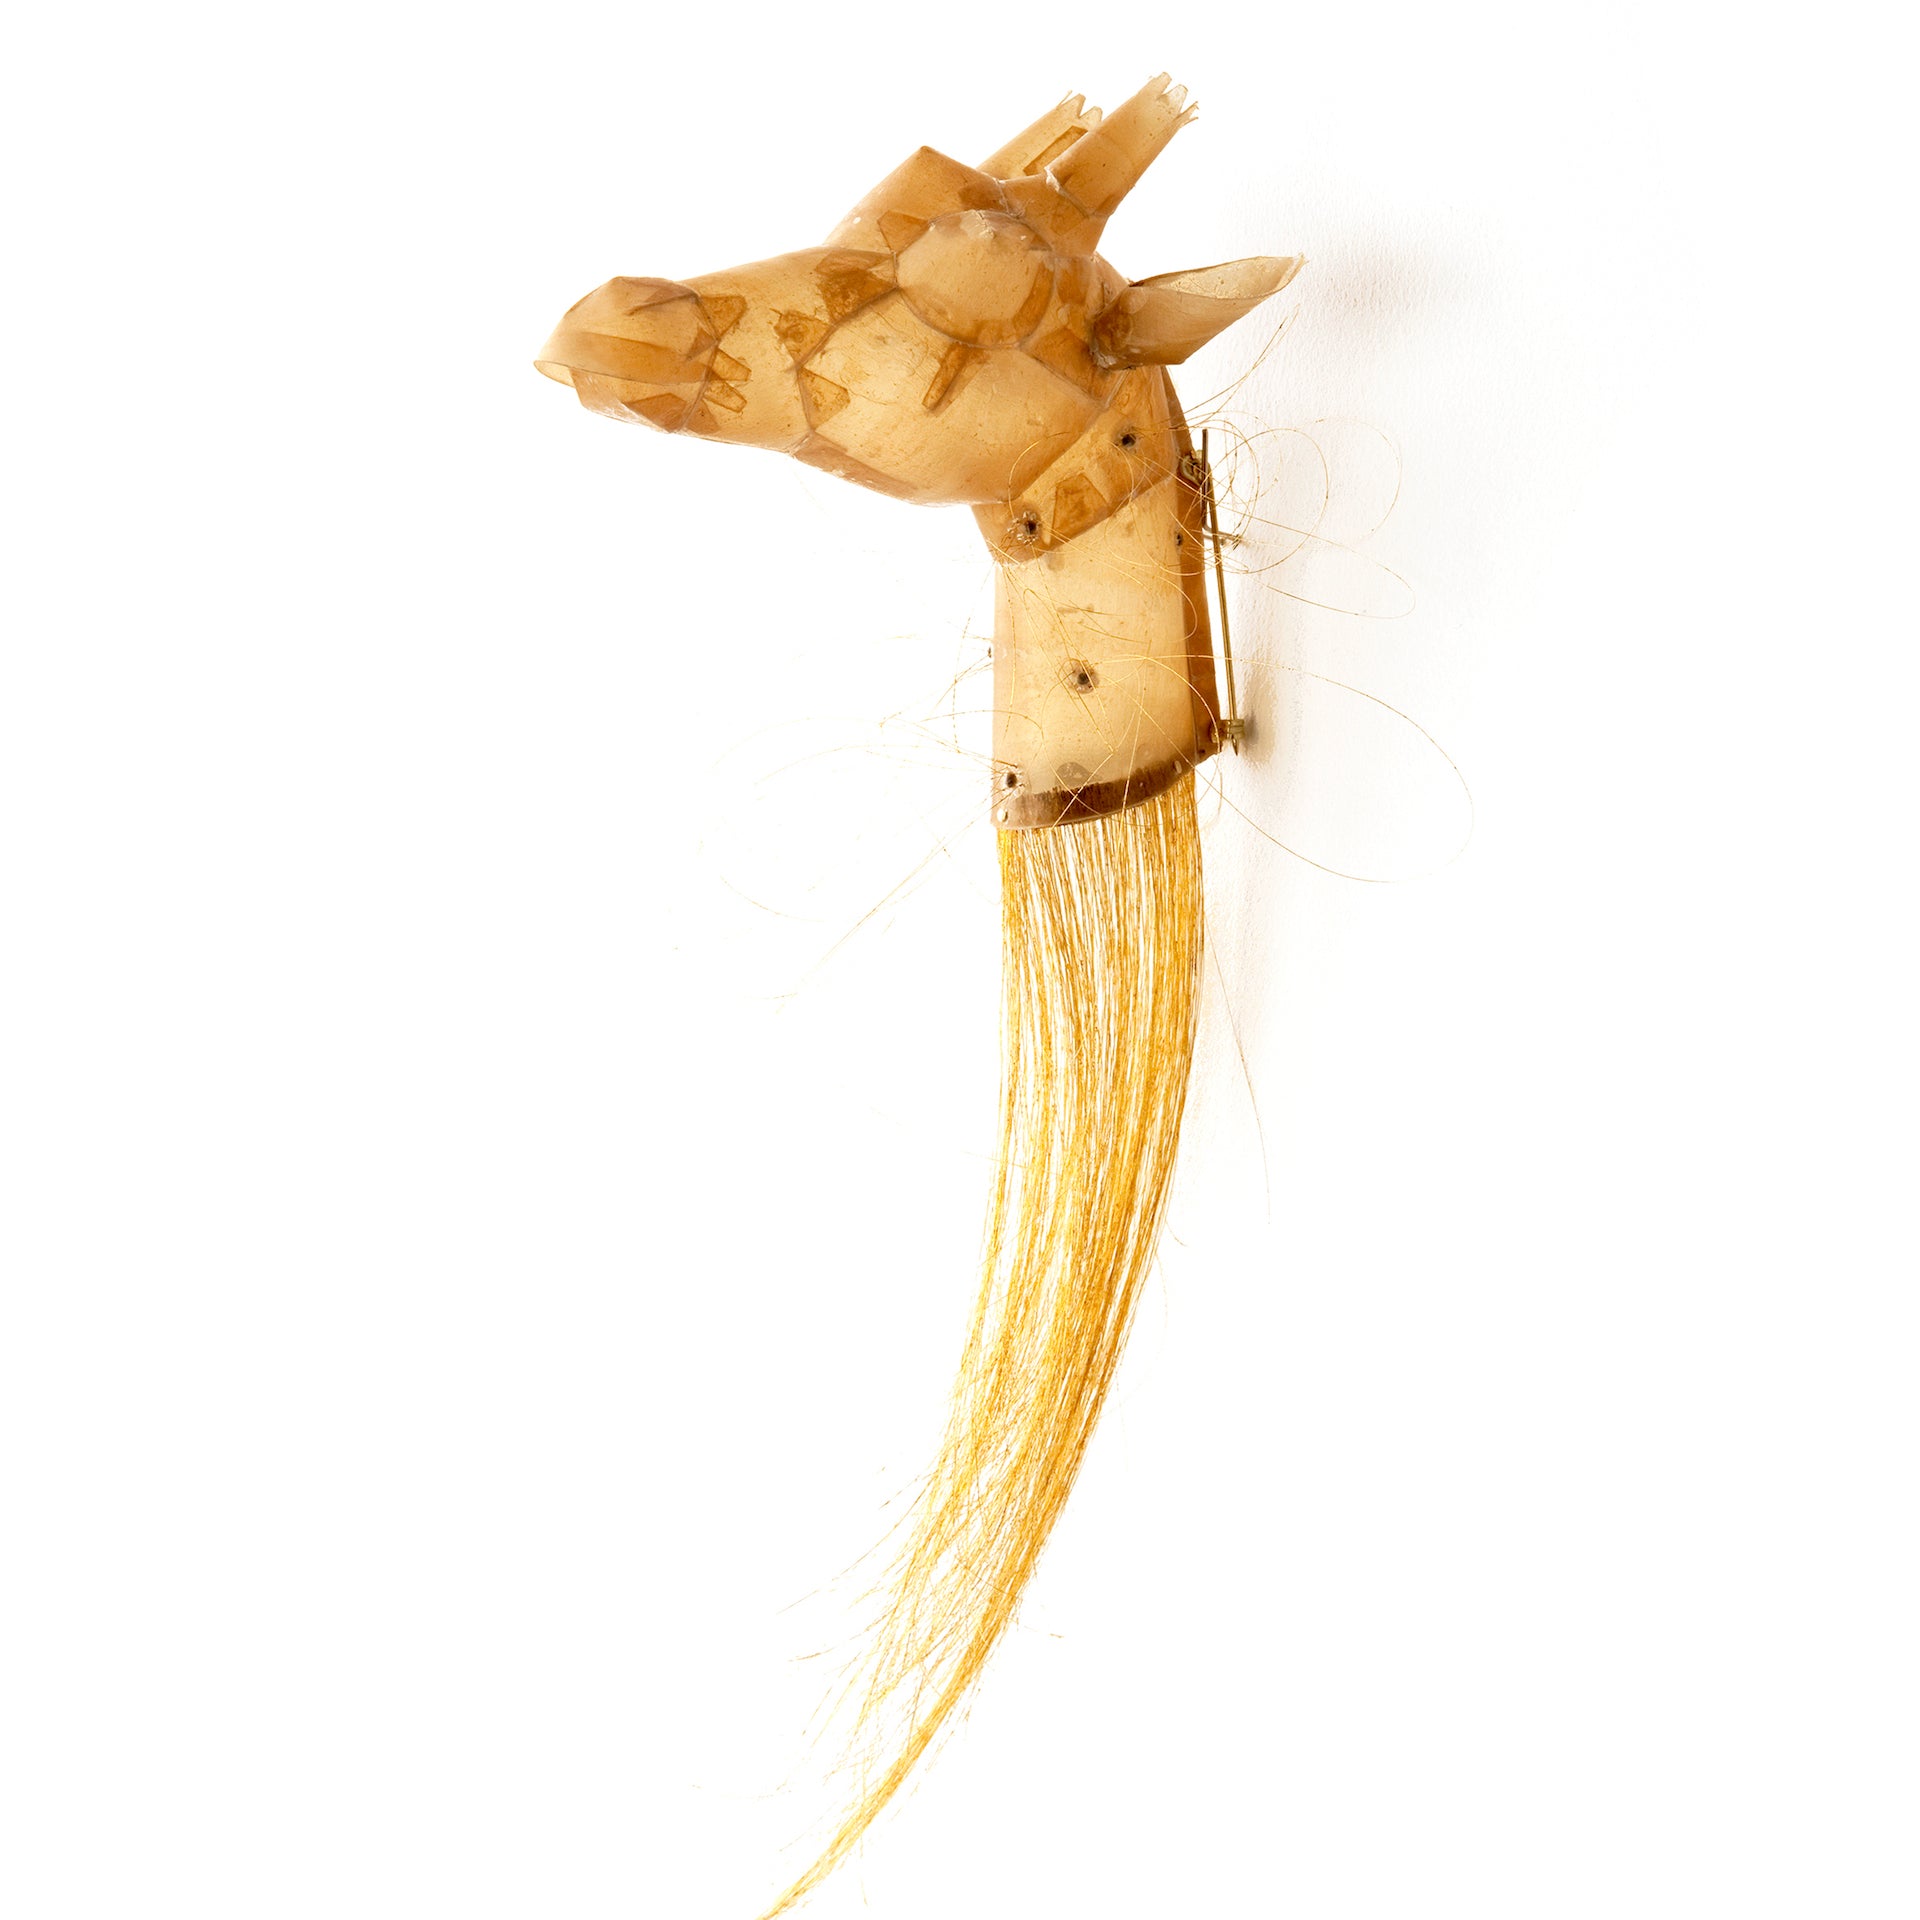 Represented by Ornamentum: Giraffe by Eunmi Chun for Ornamentum, 2011, a brooch composed of human hair, gold leaf, cow gut, seeds, and silver. Acquired by the Rhode Island School of Design Museum. Photo courtesy of Ornamentum and the artist